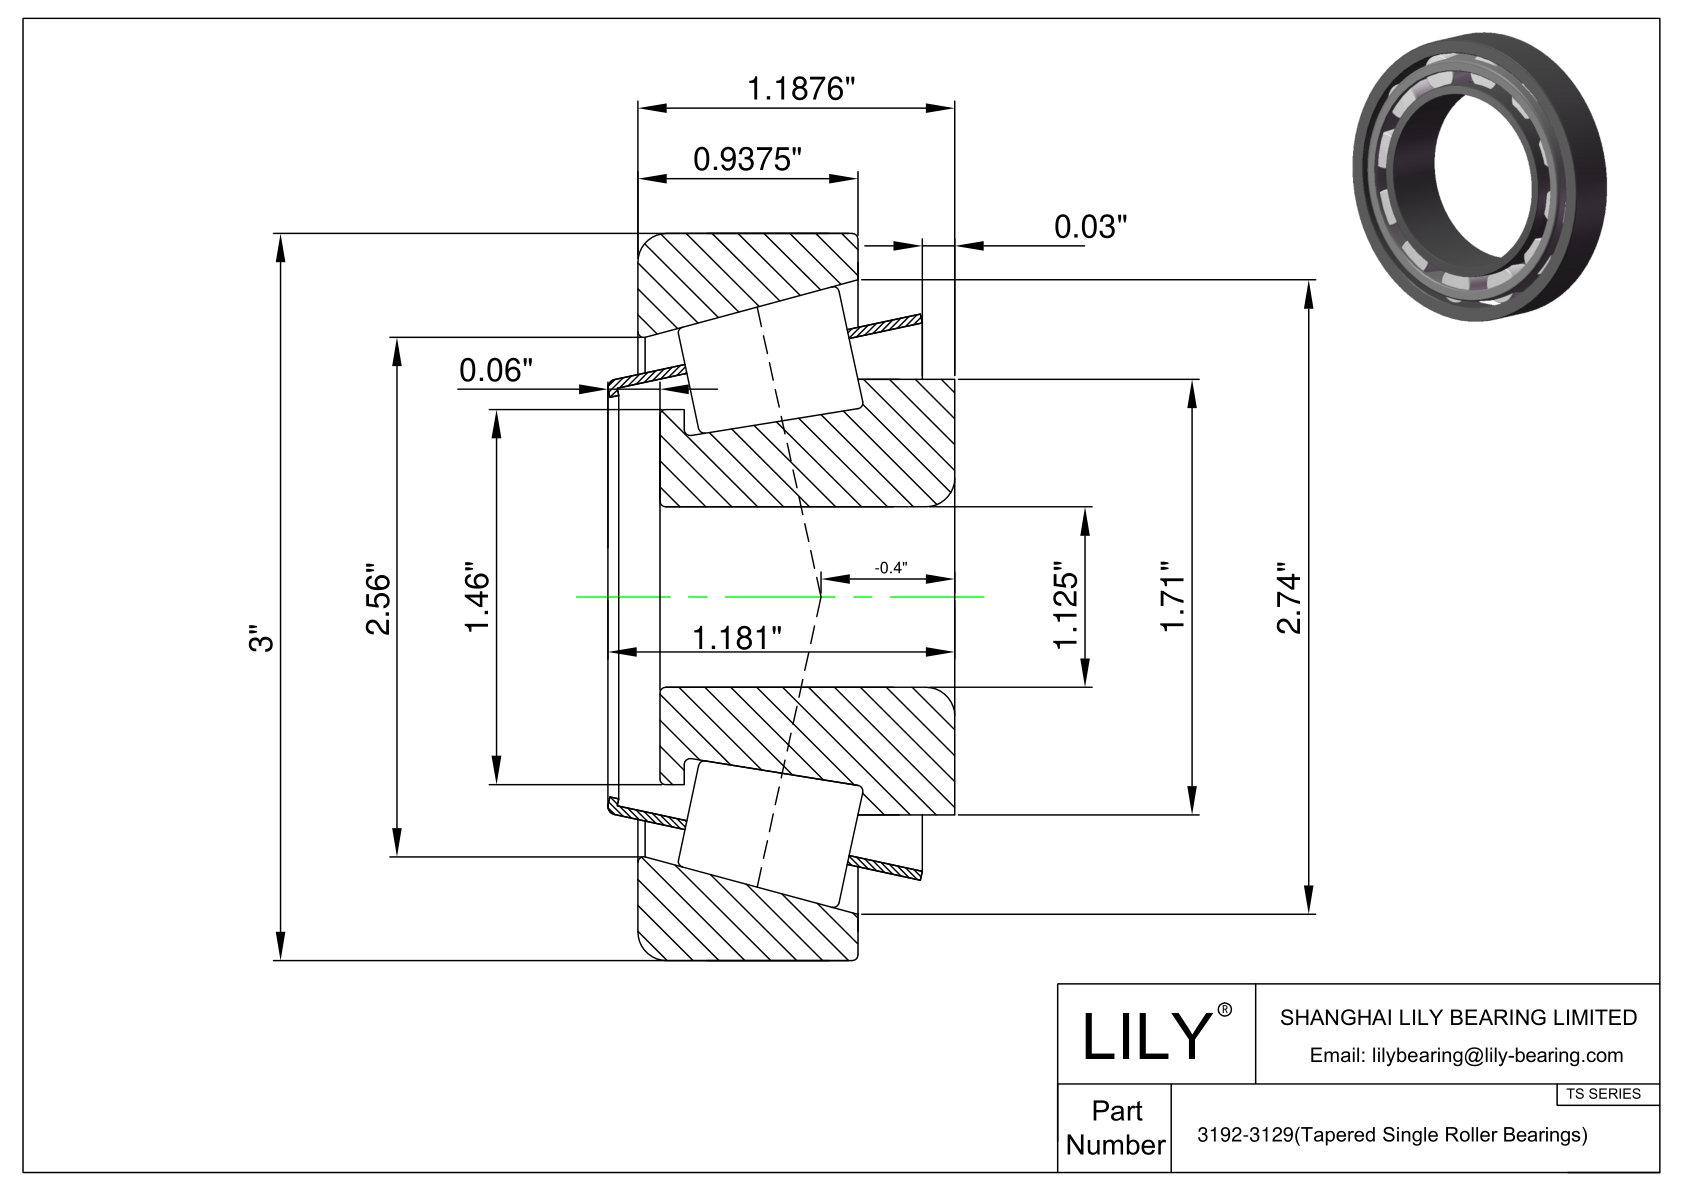 3192-3129 TS (Tapered Single Roller Bearings) (Imperial) cad drawing